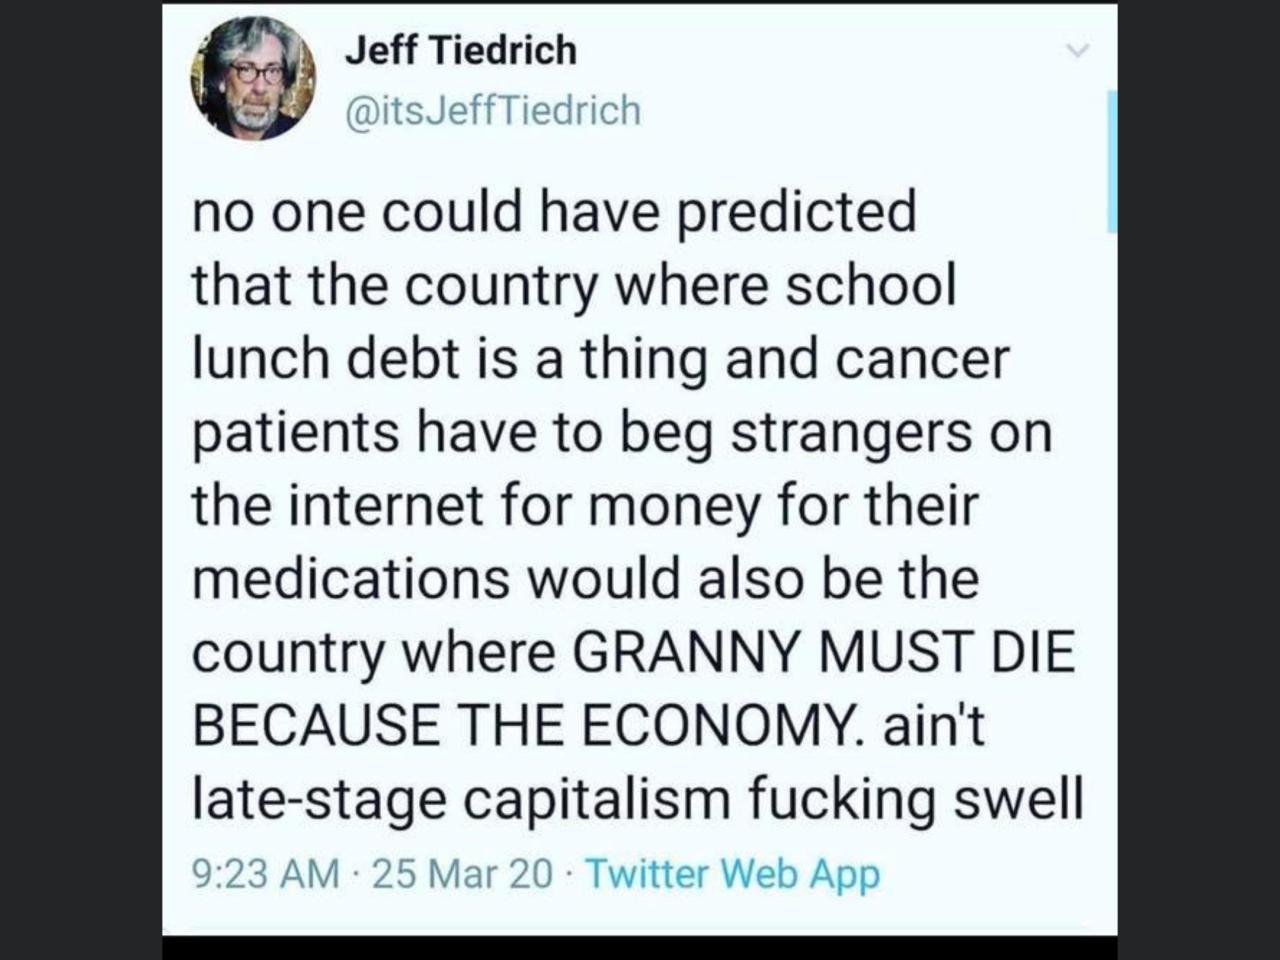 document - Jeff Tiedrich JeffTiedrich no one could have predicted that the country where school lunch debt is a thing and cancer patients have to beg strangers on the internet for money for their medications would also be the country where Granny Must Die